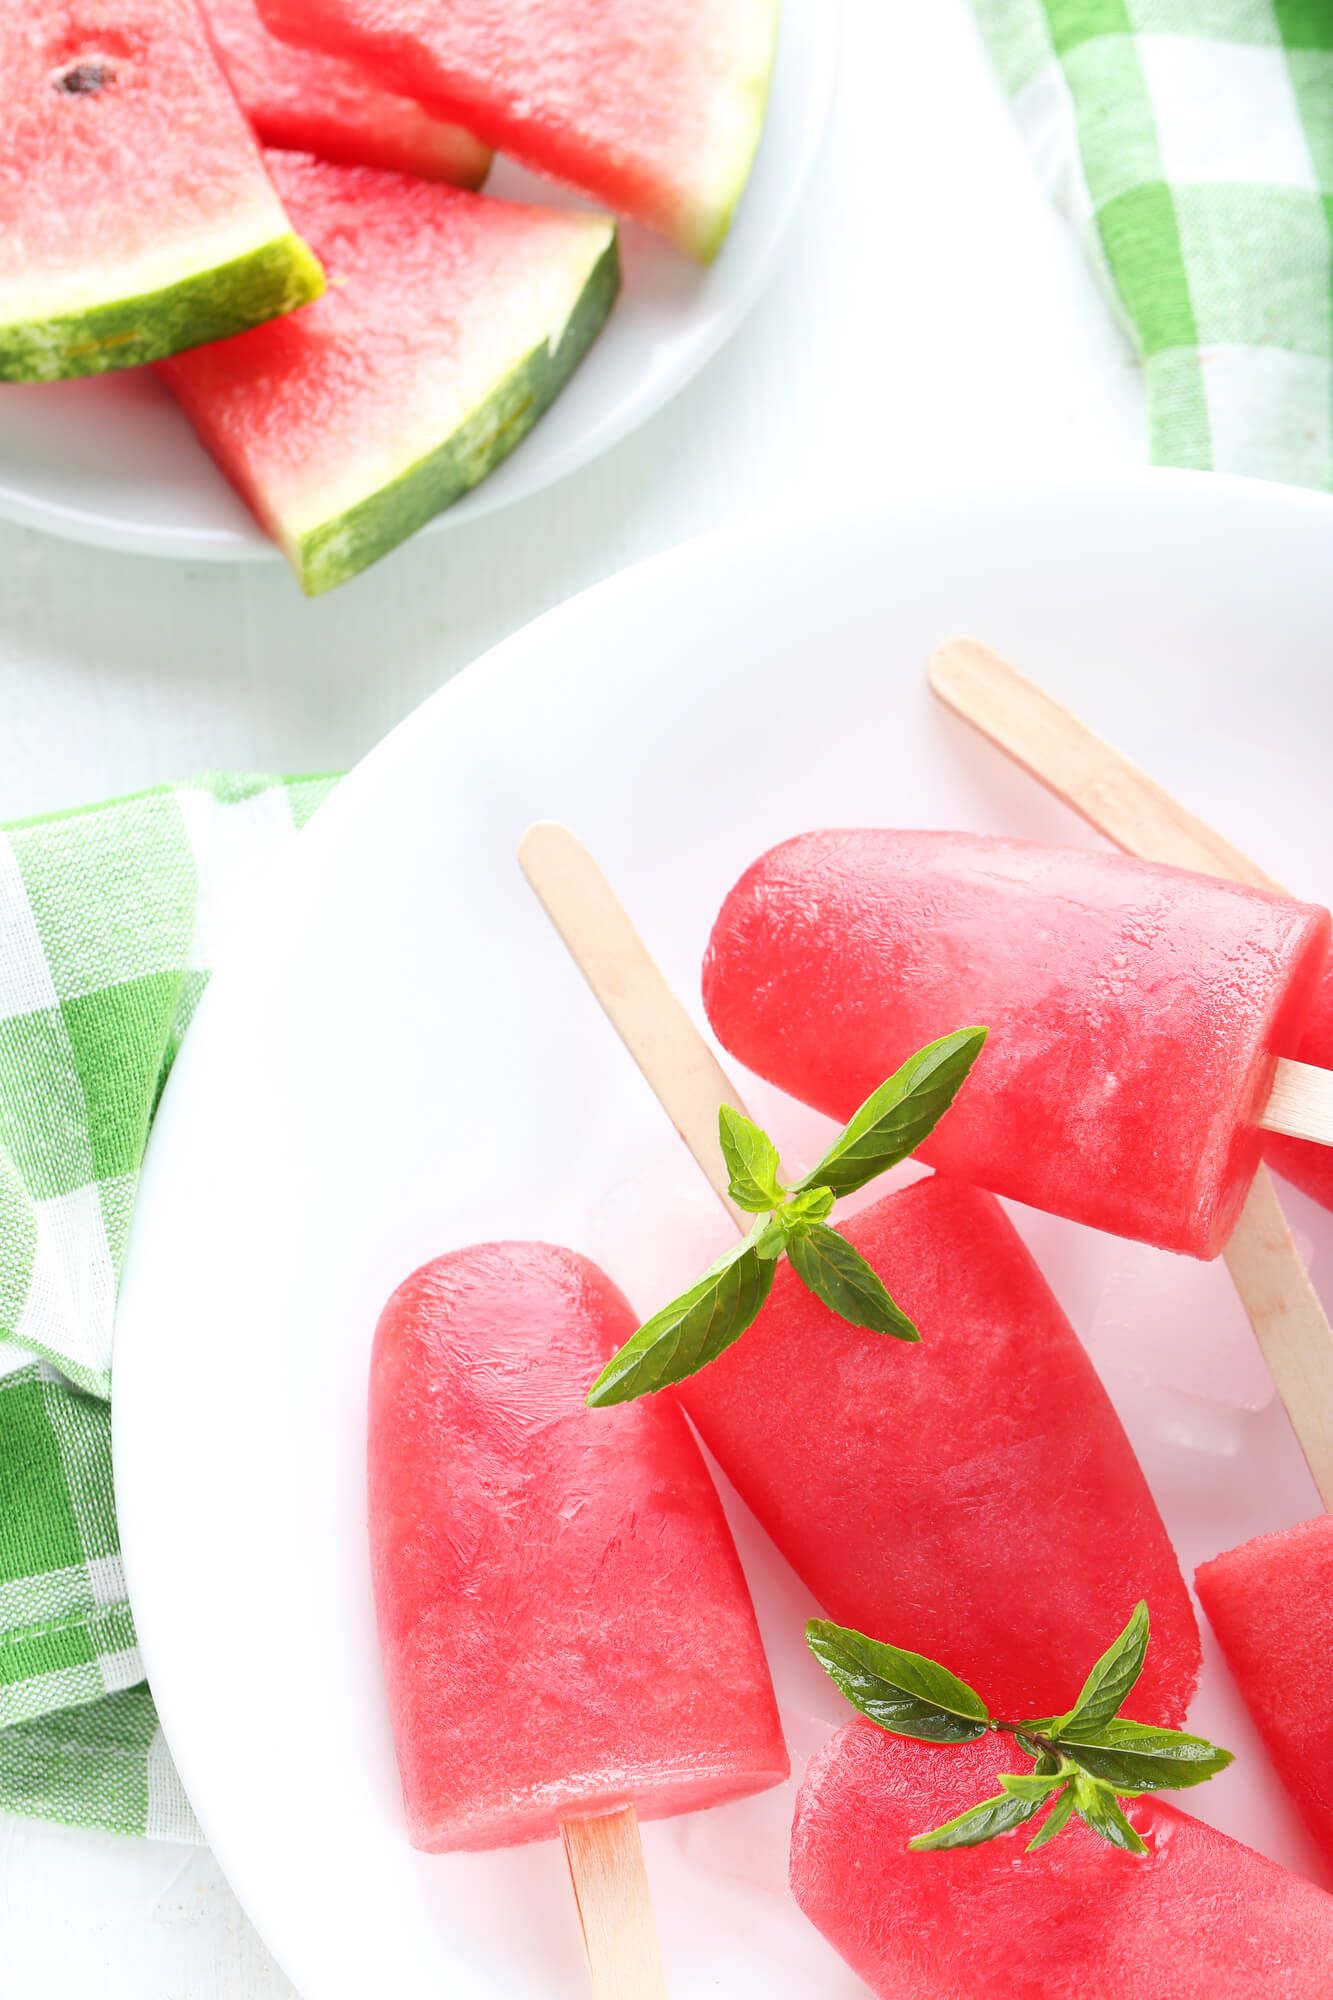 Watermelon popsicles and pieces of fresh watermelon on a white counter.